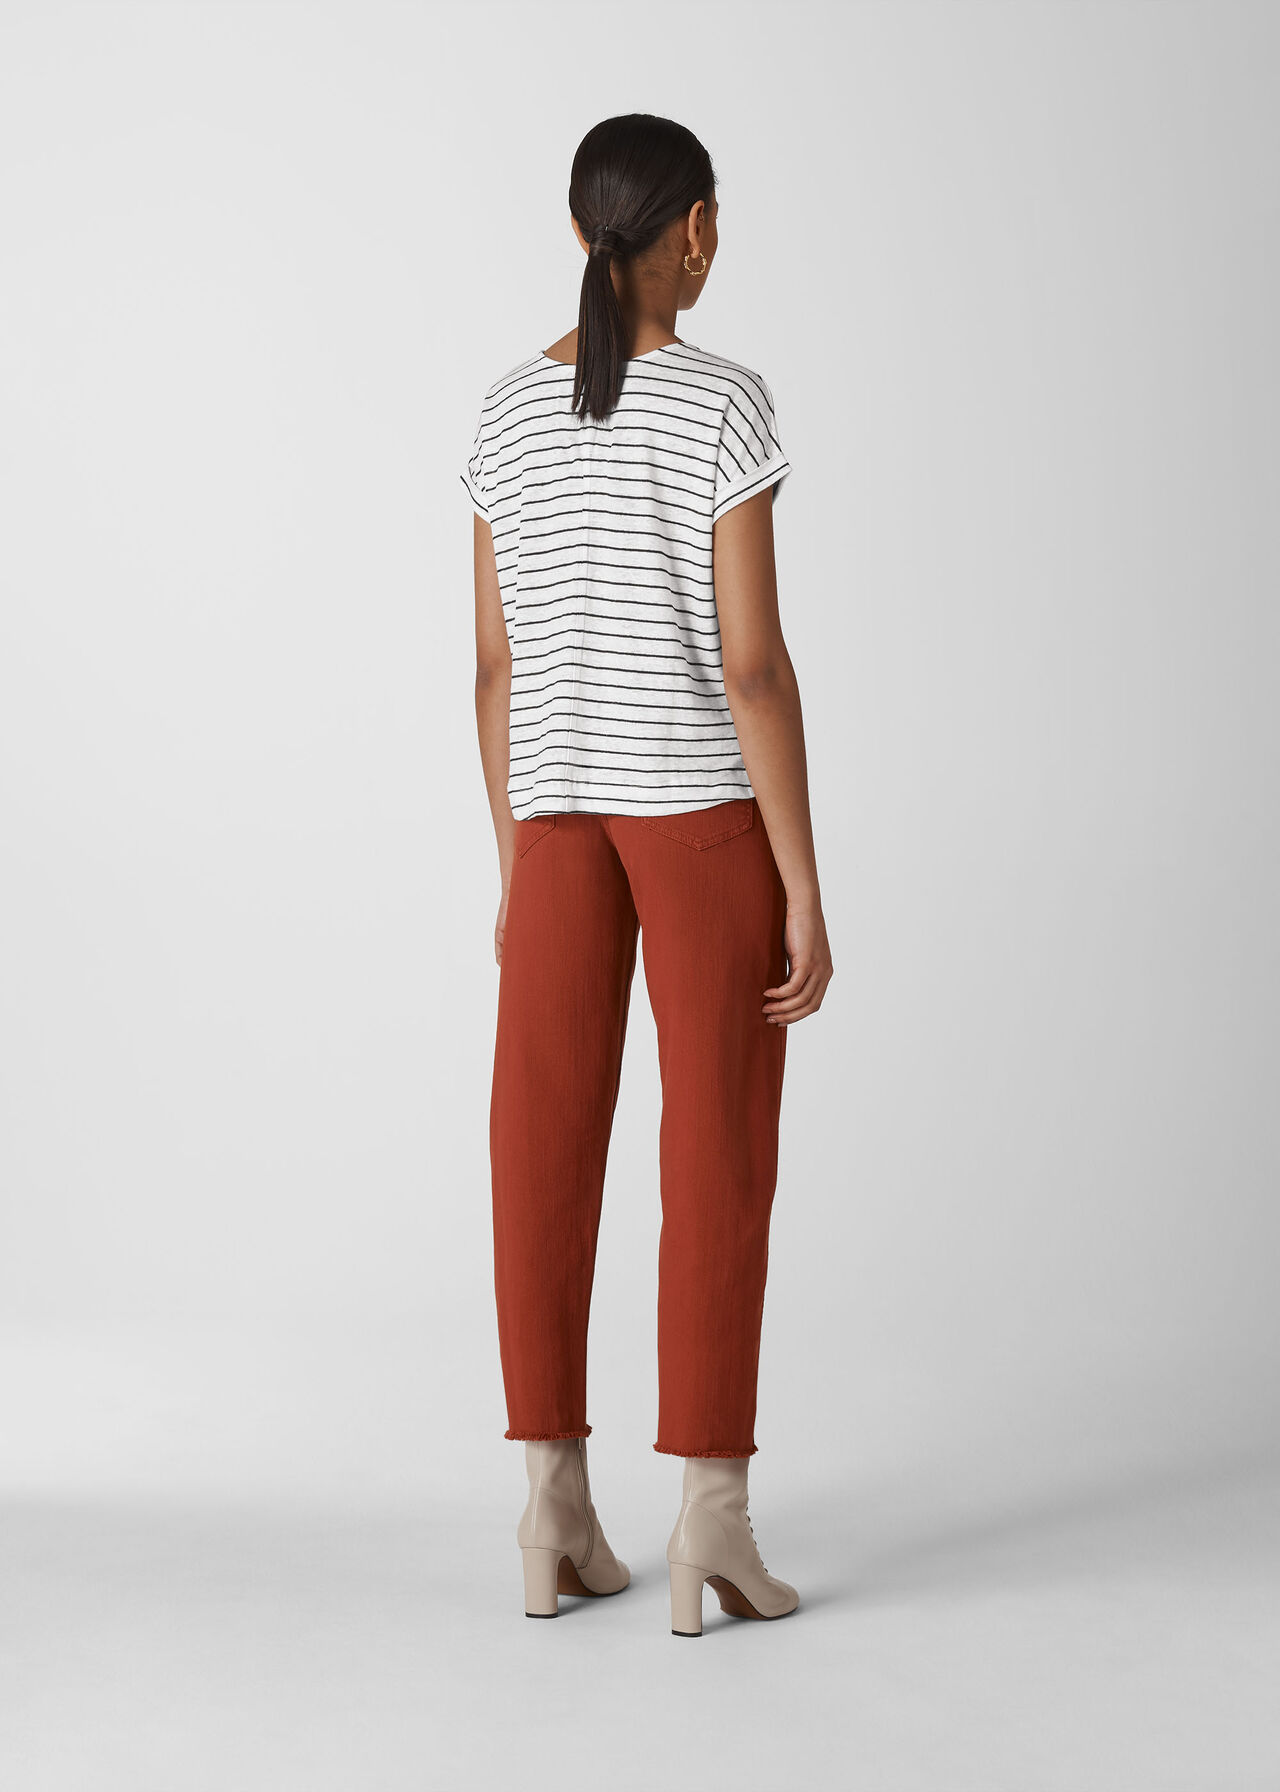 Stripe Relaxed Linen Tee Black and White